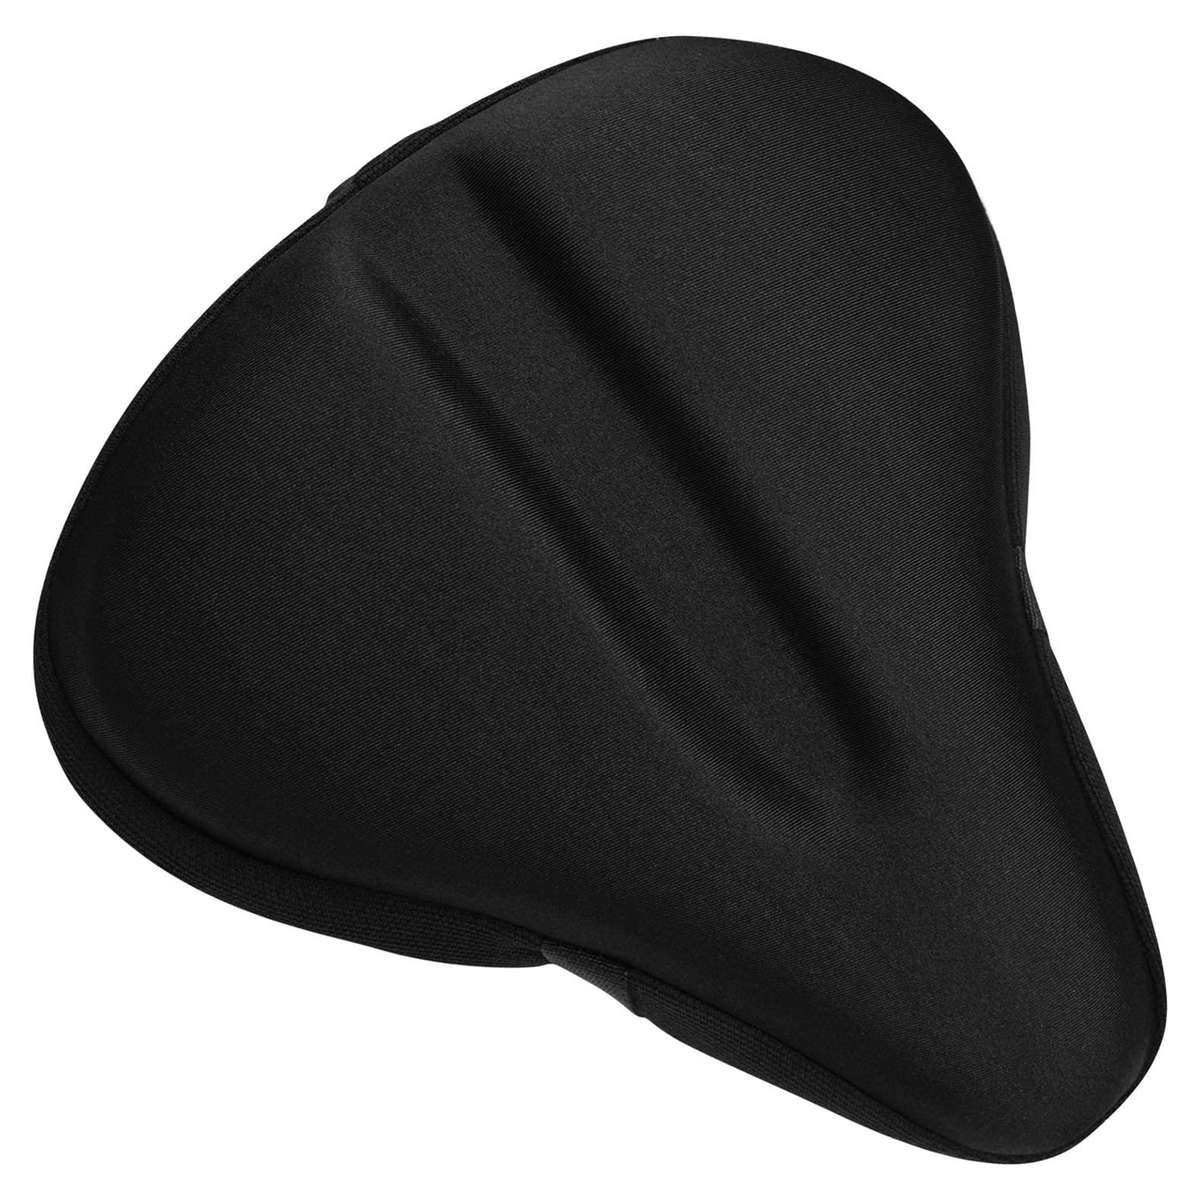 Extra Wide and Padded Bicycle Saddle Front Seat Large Comfort Breathable Bicycle Saddle Suitable for Women and Men Most Comfortable Bike Seat